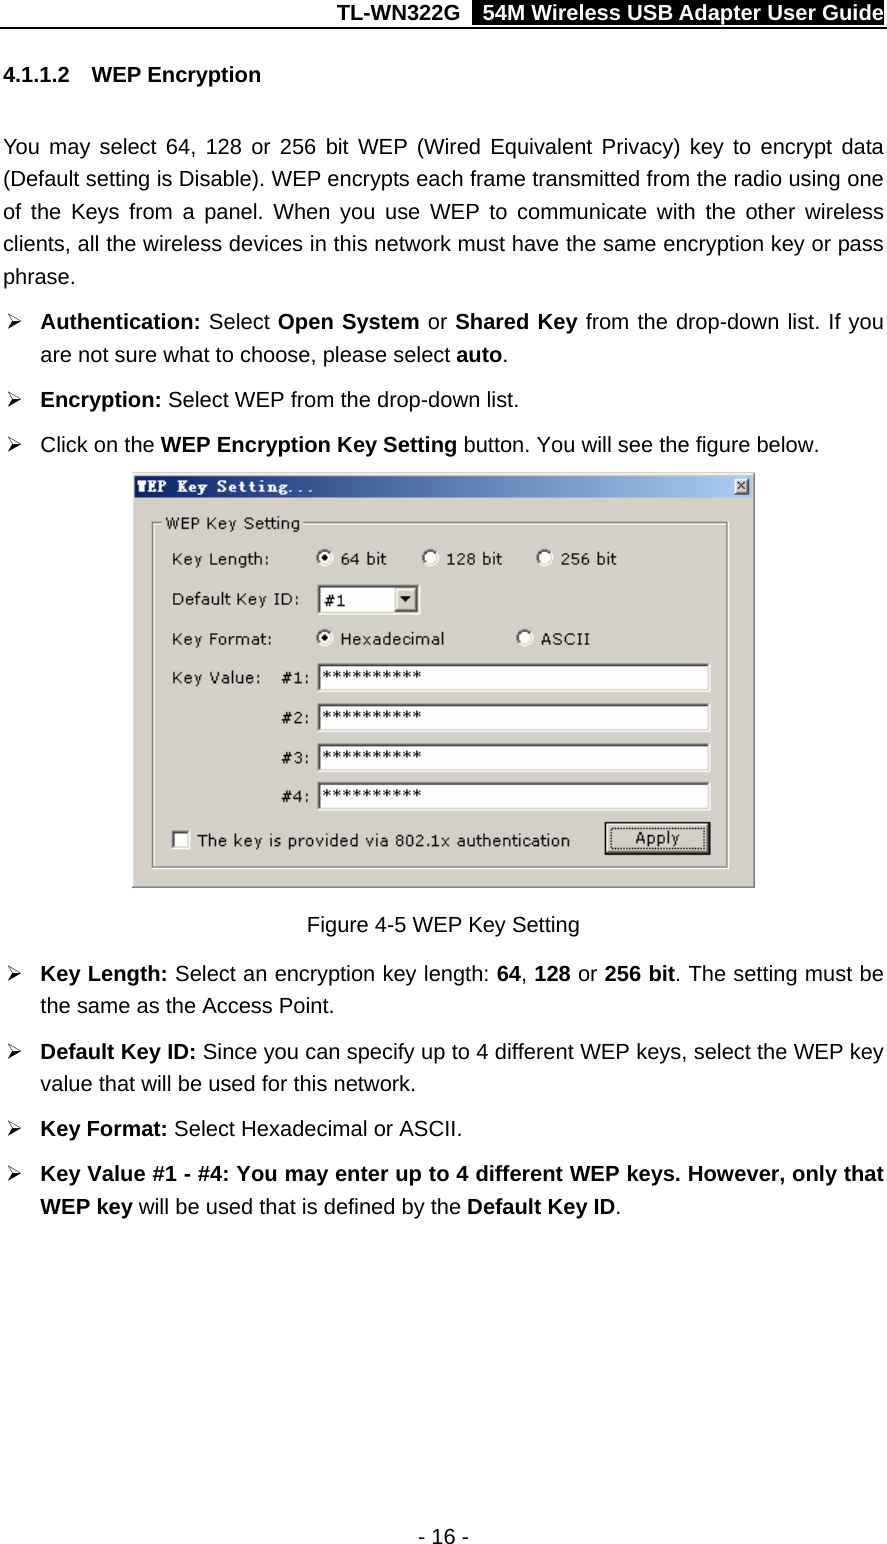 TL-WN322G    54M Wireless USB Adapter User Guide 4.1.1.2  WEP Encryption You may select 64, 128 or 256 bit WEP (Wired Equivalent Privacy) key to encrypt data (Default setting is Disable). WEP encrypts each frame transmitted from the radio using one of the Keys from a panel. When you use WEP to communicate with the other wireless clients, all the wireless devices in this network must have the same encryption key or pass phrase. ¾ Authentication: Select Open System or Shared Key from the drop-down list. If you are not sure what to choose, please select auto. ¾ Encryption: Select WEP from the drop-down list. ¾  Click on the WEP Encryption Key Setting button. You will see the figure below.  Figure 4-5 WEP Key Setting ¾ Key Length: Select an encryption key length: 64, 128 or 256 bit. The setting must be the same as the Access Point. ¾ Default Key ID: Since you can specify up to 4 different WEP keys, select the WEP key value that will be used for this network. ¾ Key Format: Select Hexadecimal or ASCII. ¾ Key Value #1 - #4: You may enter up to 4 different WEP keys. However, only that WEP key will be used that is defined by the Default Key ID. - 16 - 